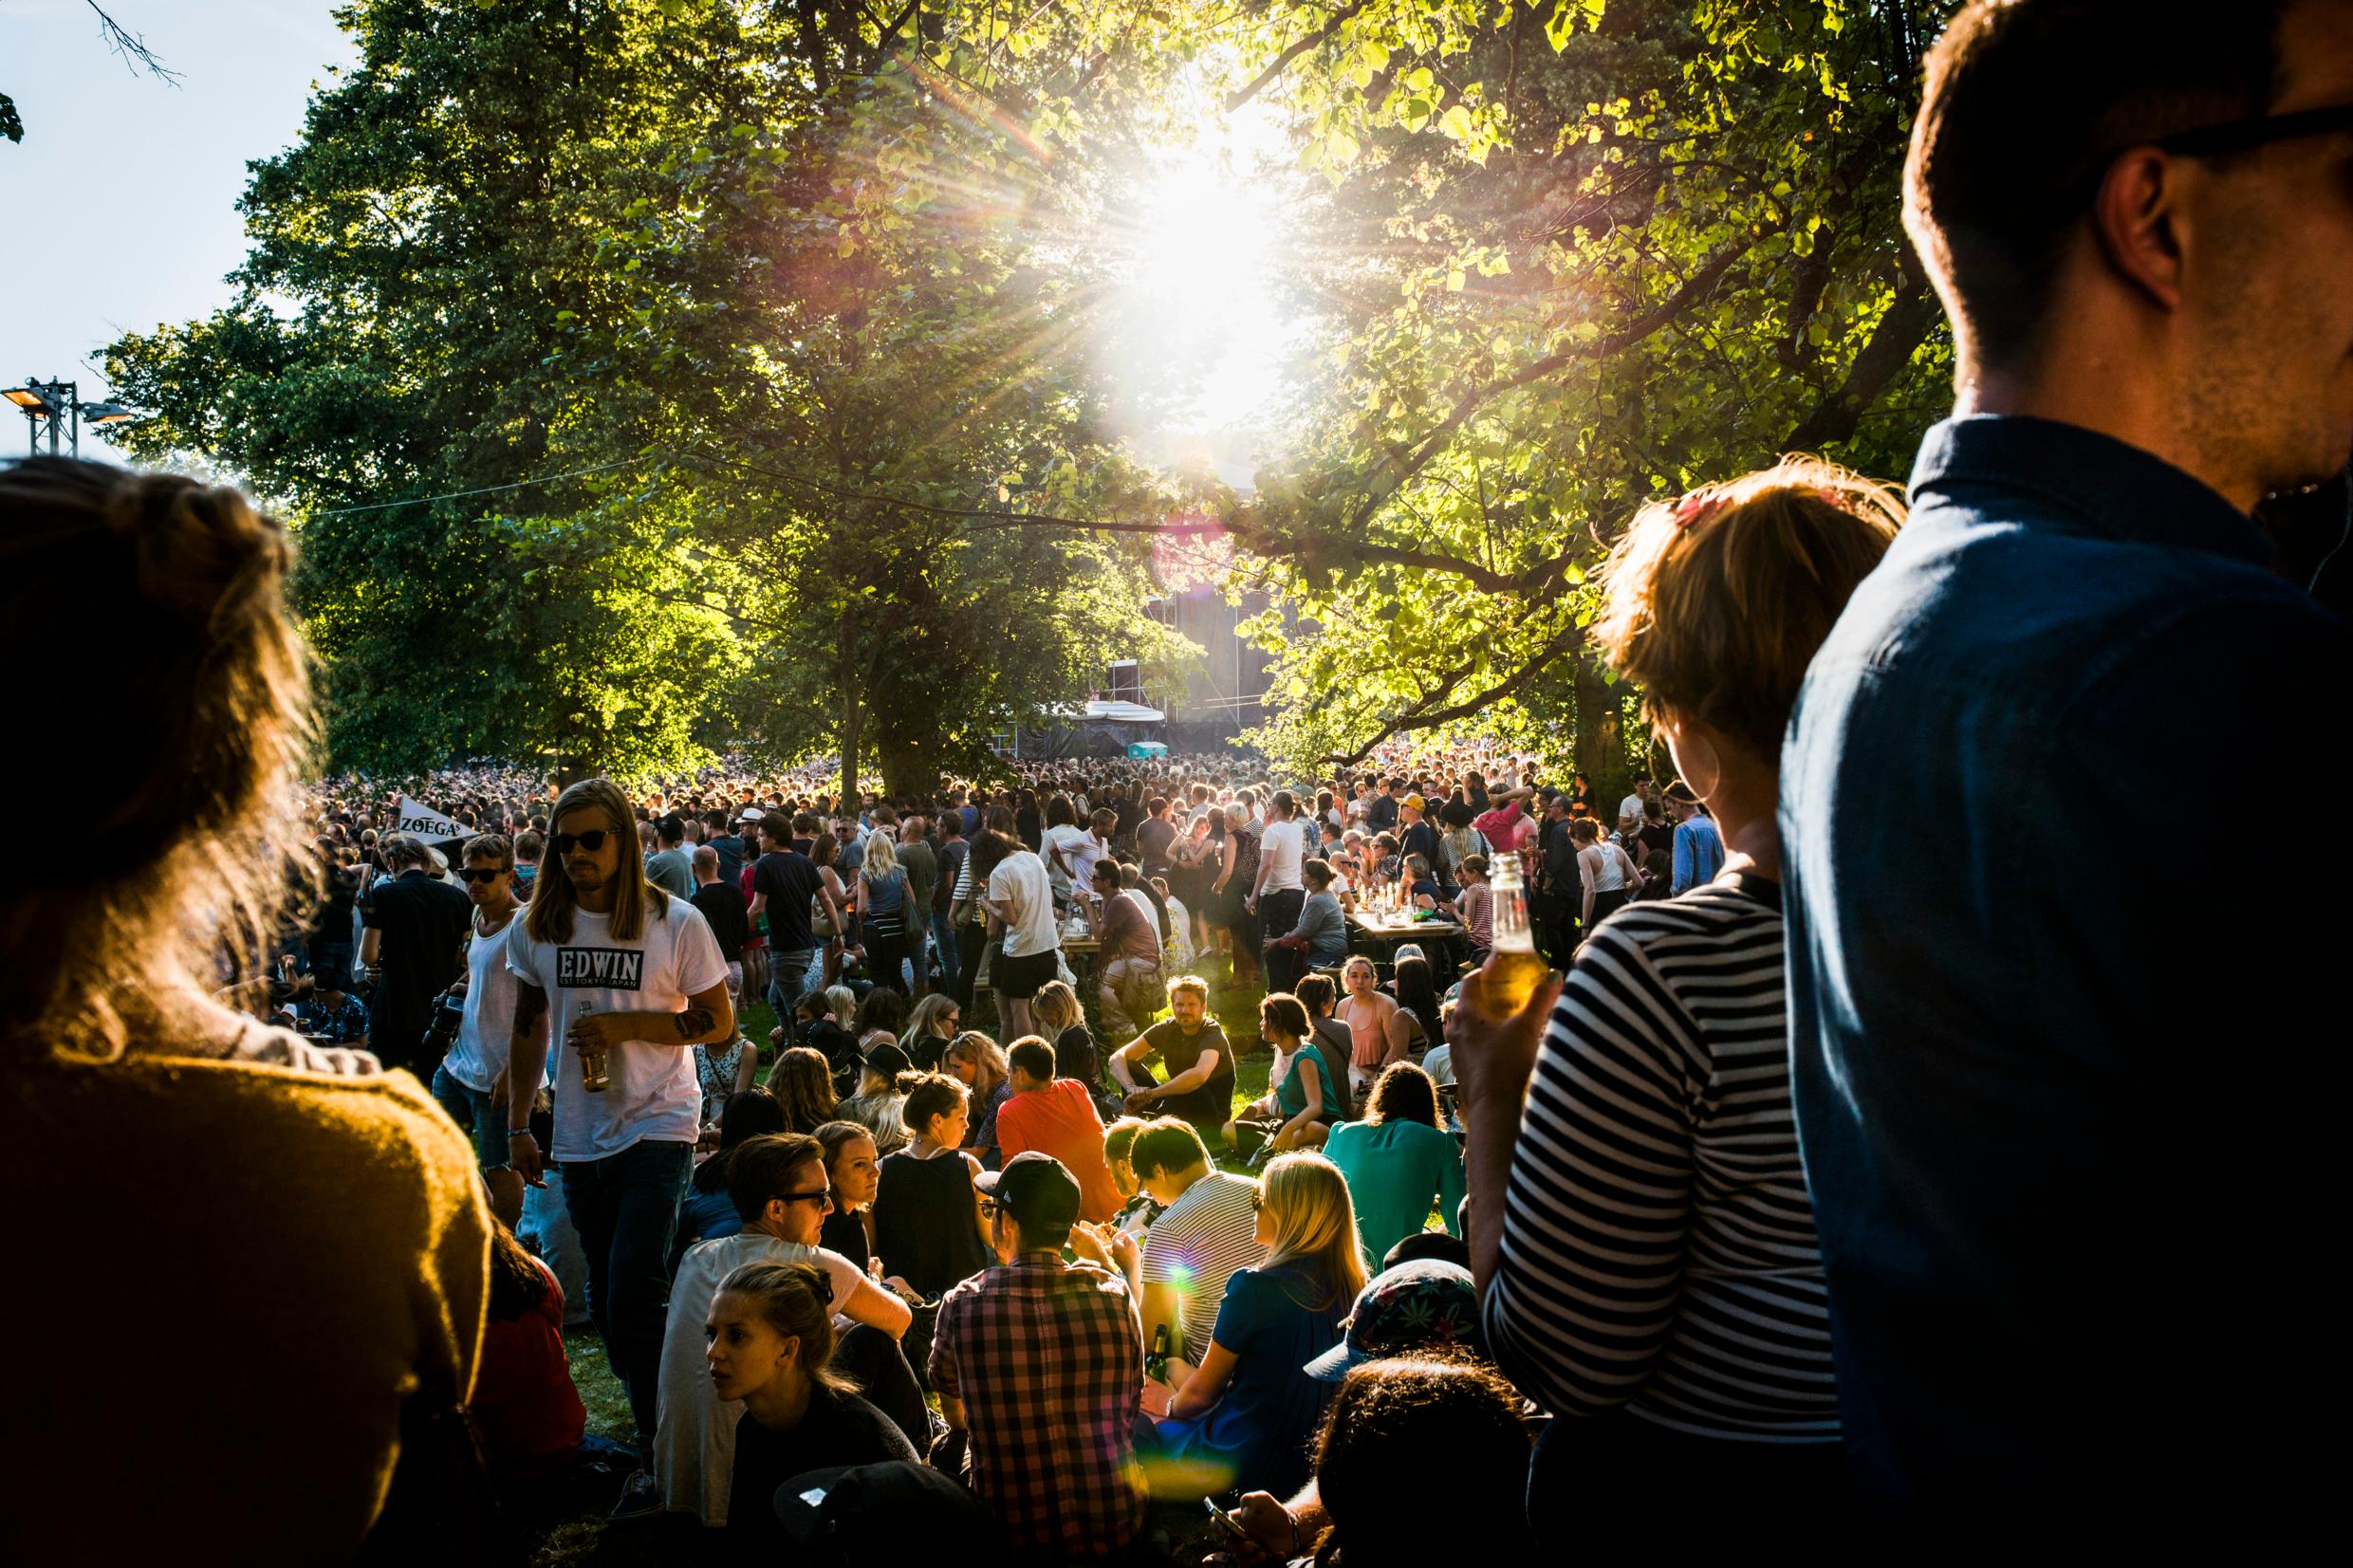 A crowd of people in a park seen against sunlight shining through green trees.